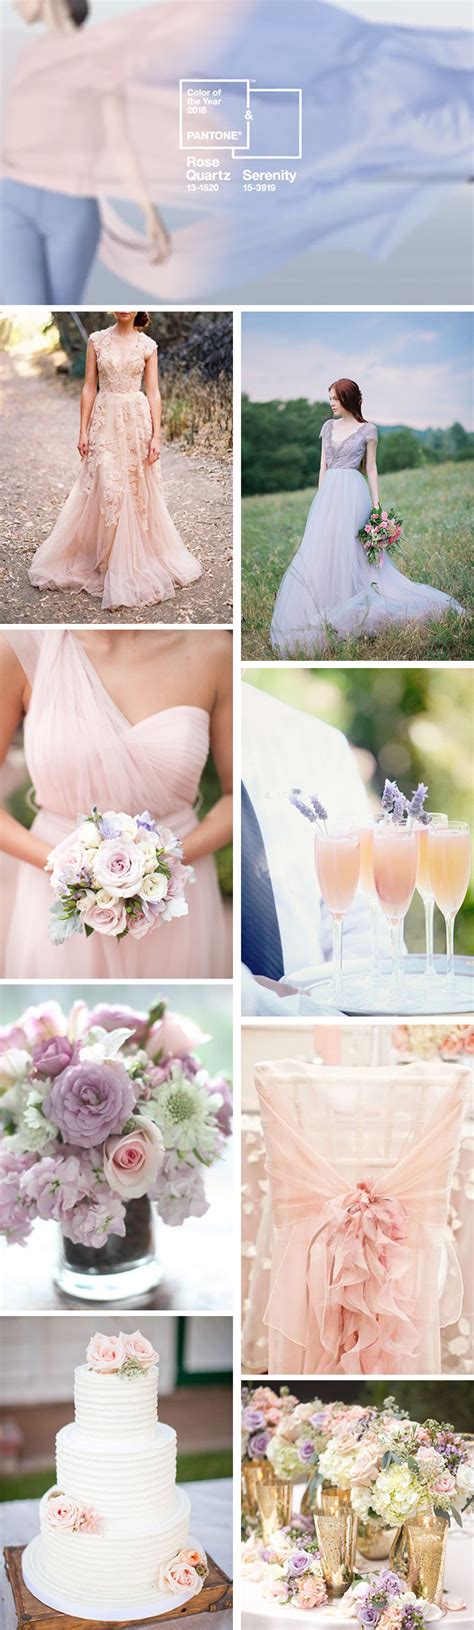 Pantone Colors Of The Year 2016 The Destination Wedding Blog Jet